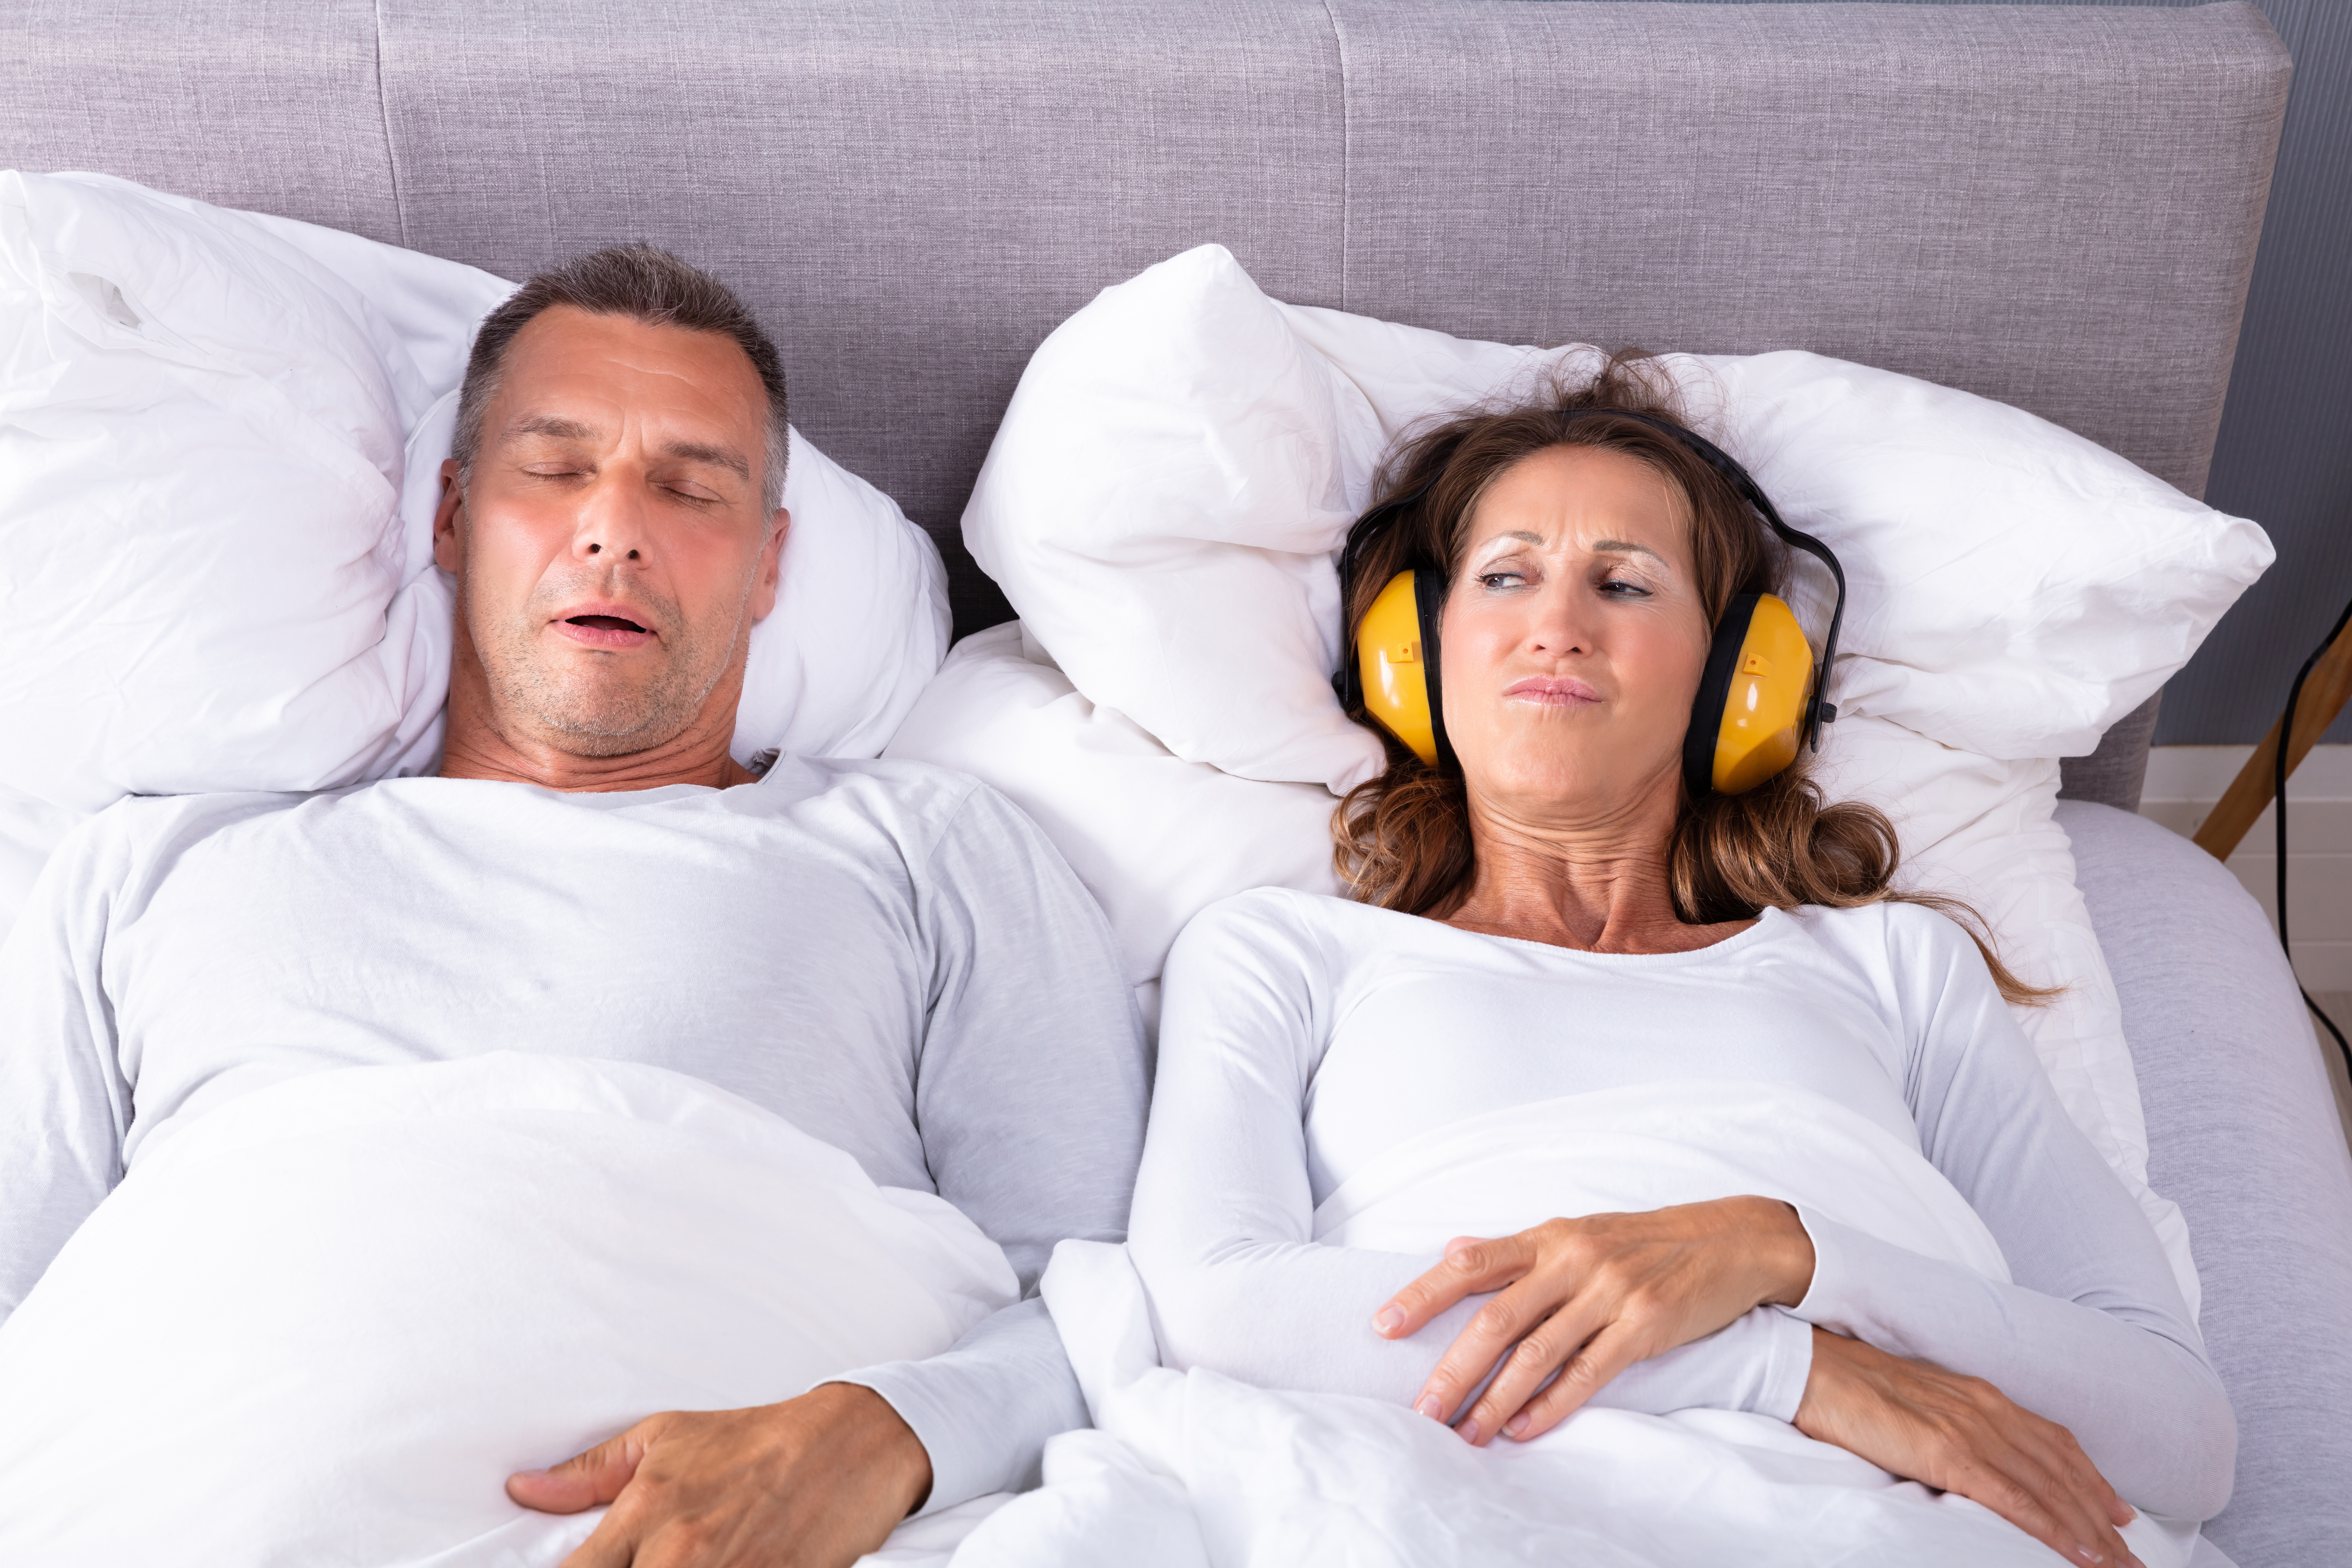 Mature Woman Covering Her Ears With Headphone While Man Snoring In Bed